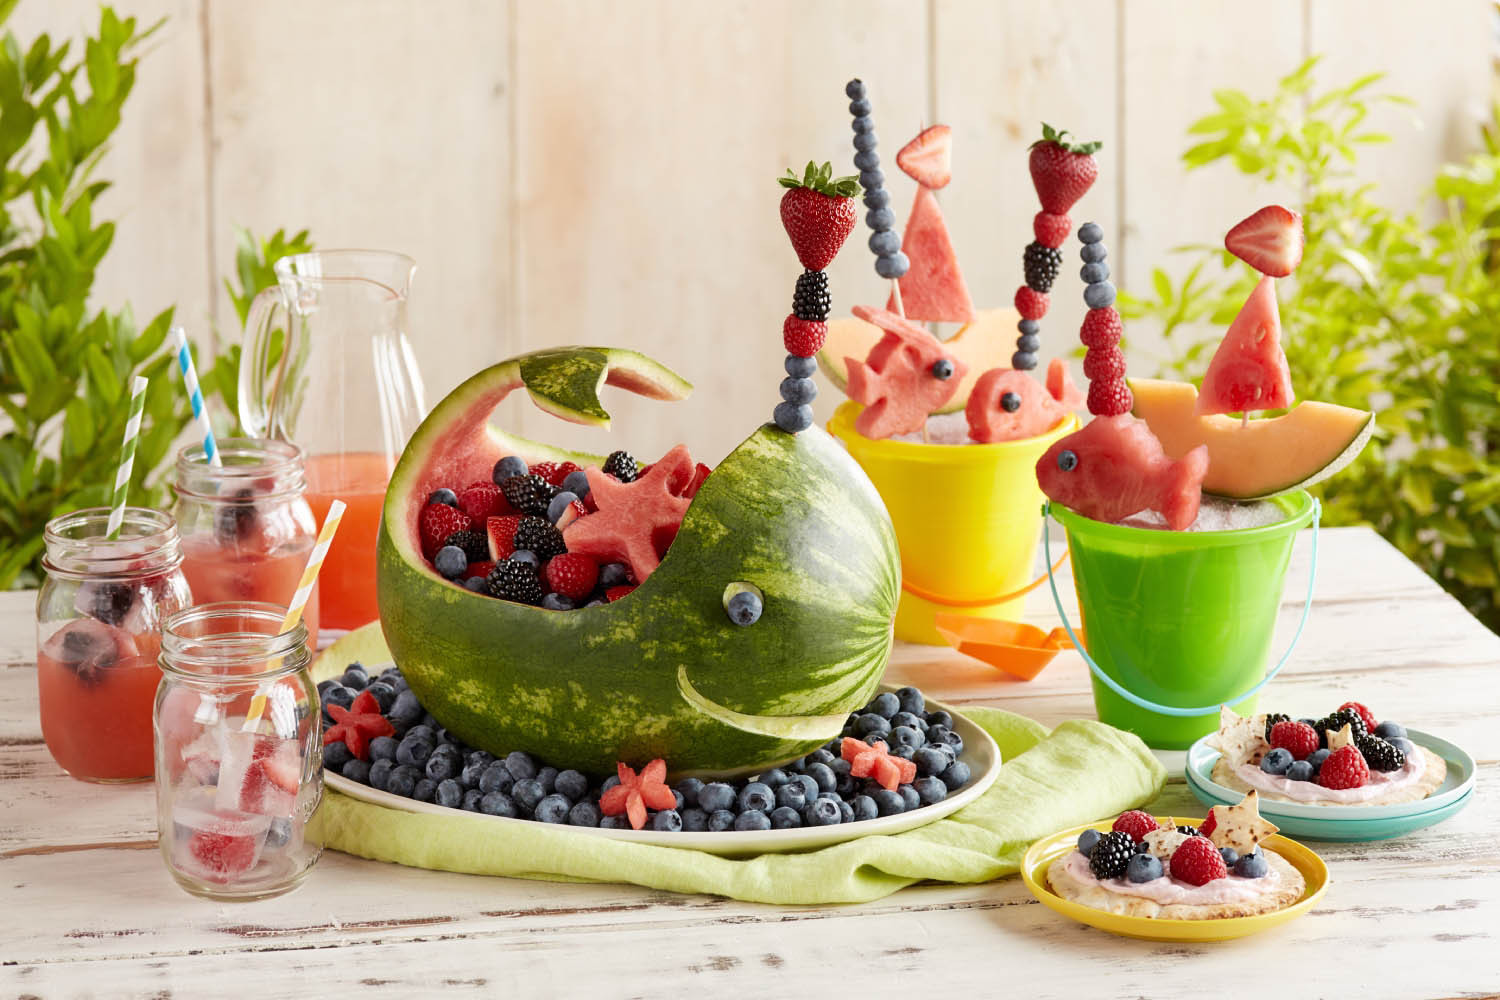 Beach Party Food Ideas Birthday
 Splash into Summer with a Berry Beach Party